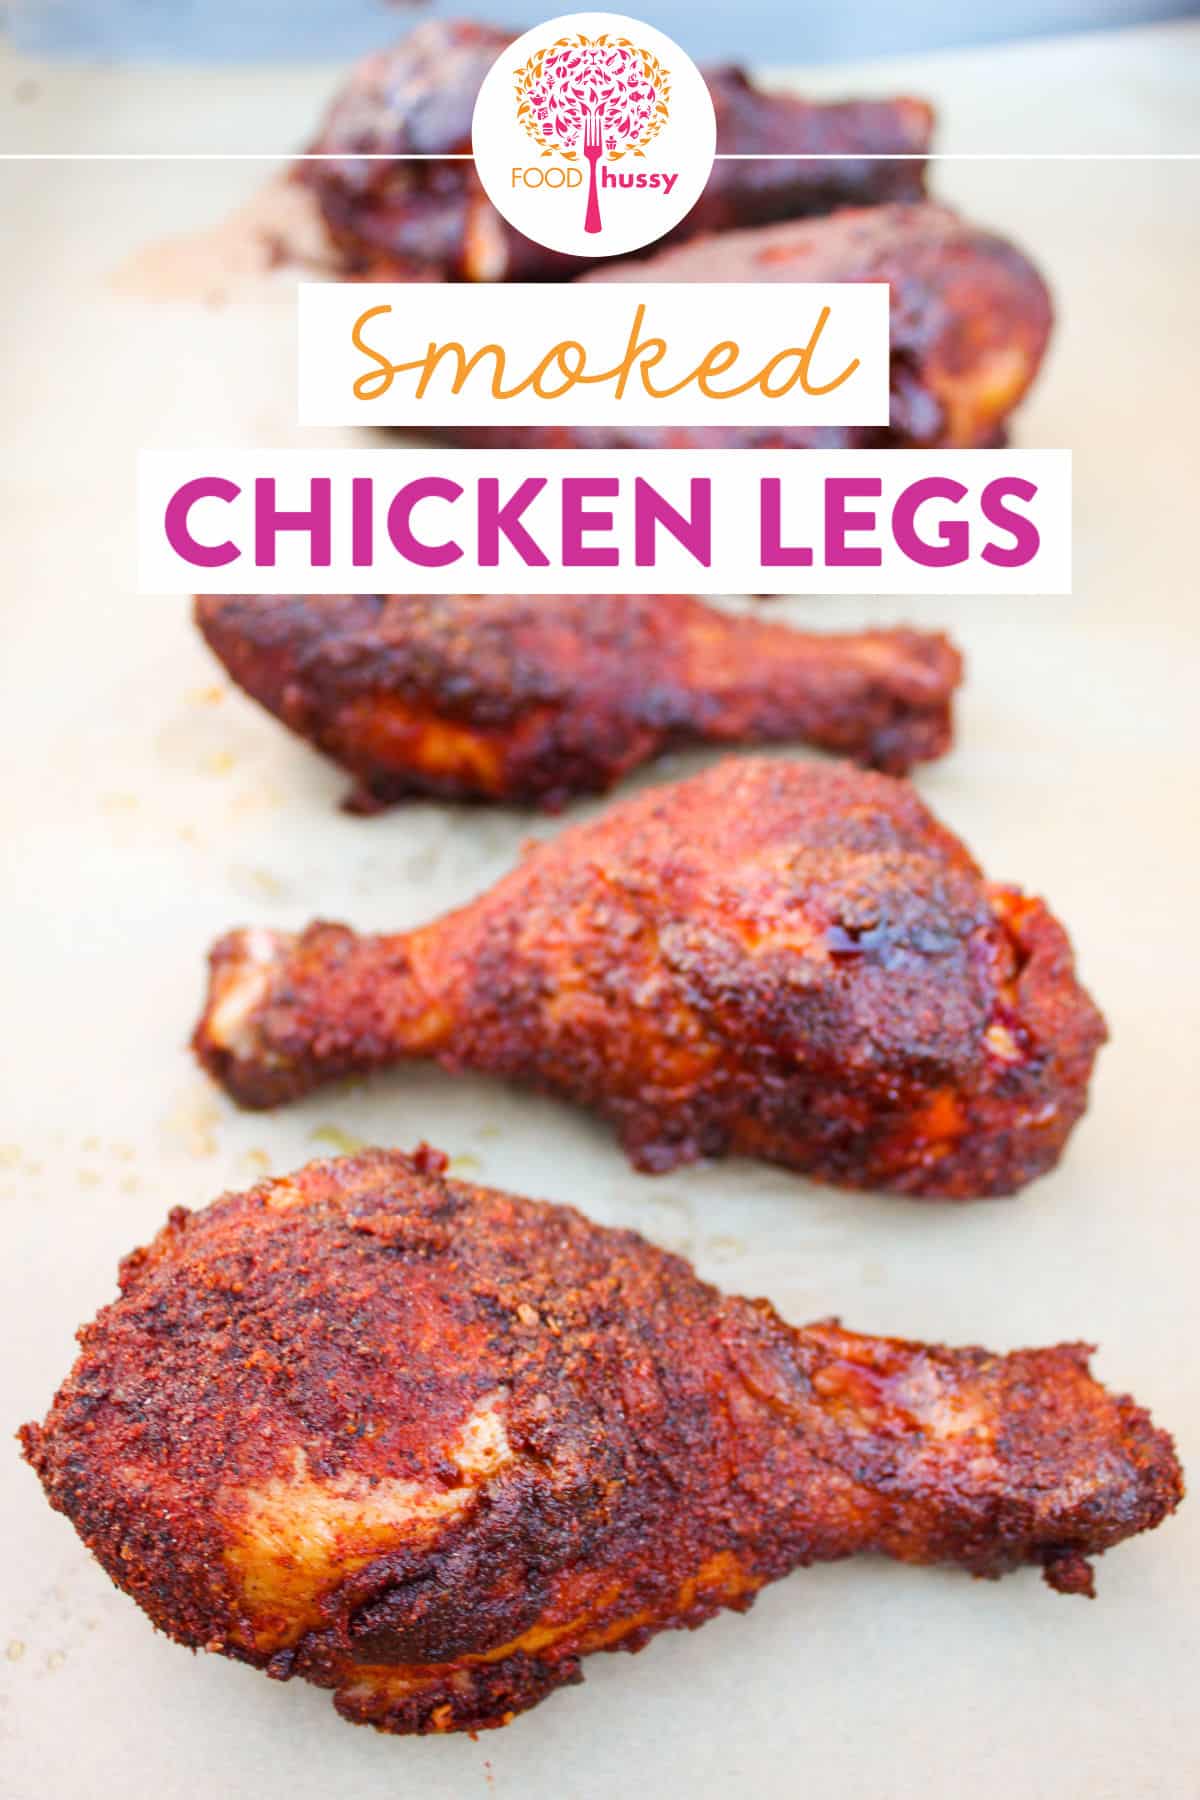 Smoked Chicken Legs are easy to make and when you cook them low and slow - you'll get that perfect smoky flavor! These Smoked Drumsticks are coated in a homemade dry rub with simple spices you already have on hand.
 via @foodhussy